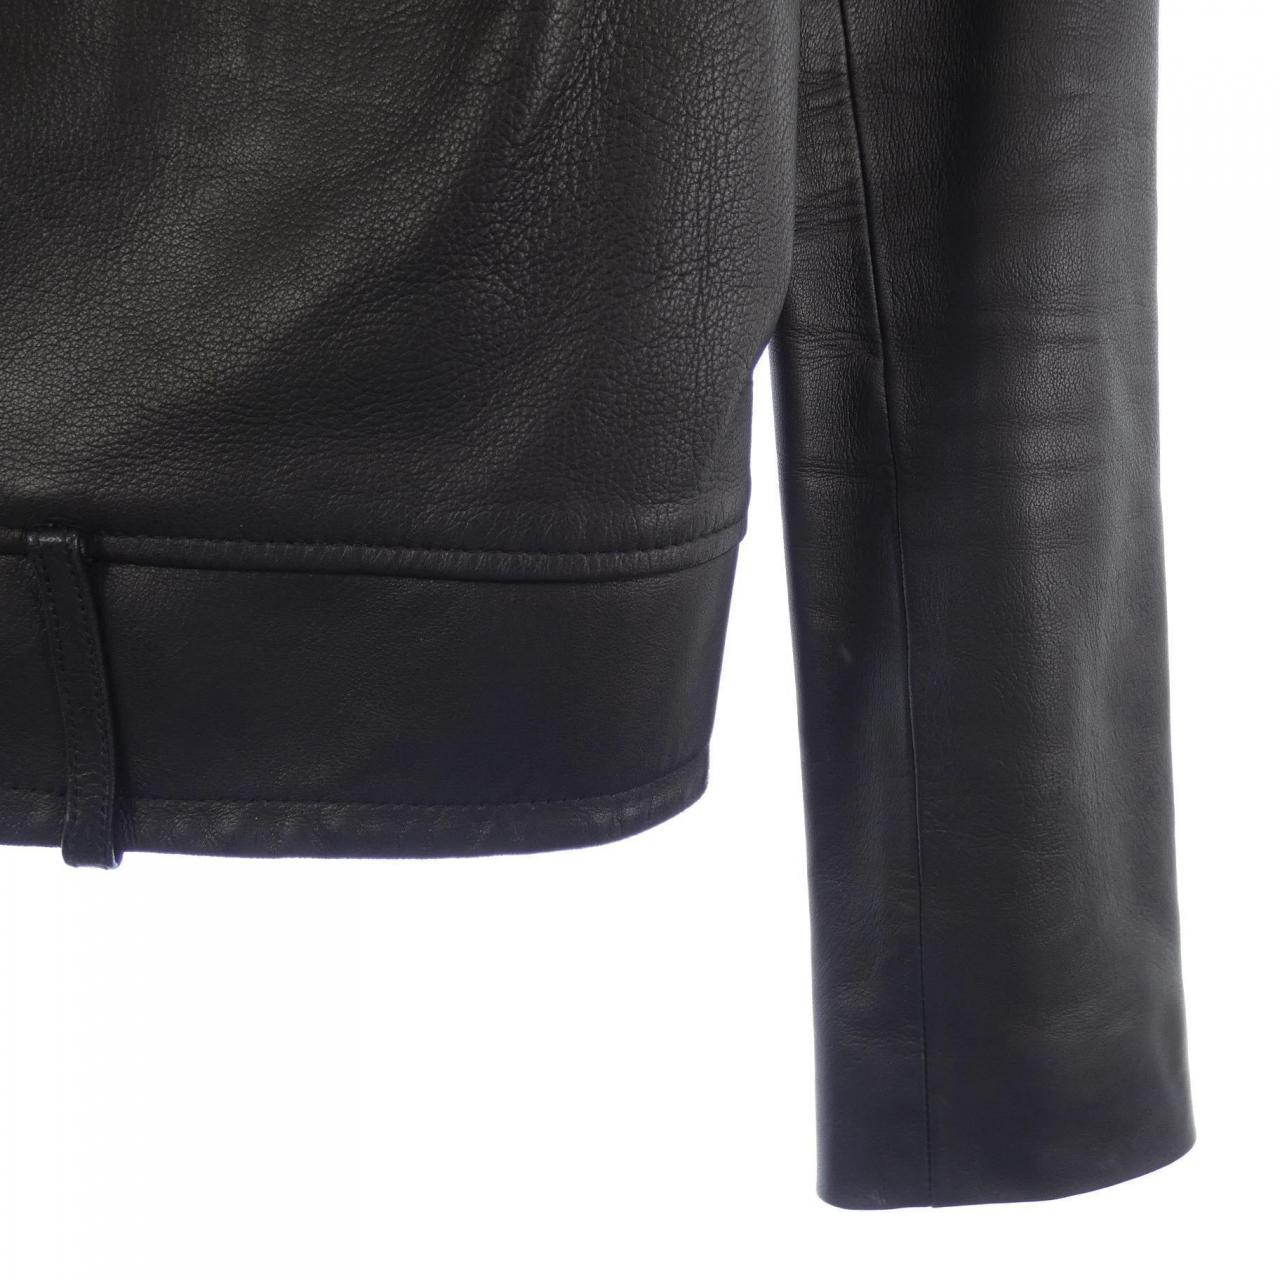 Upper heights UPPER HIGHTS leather jacket